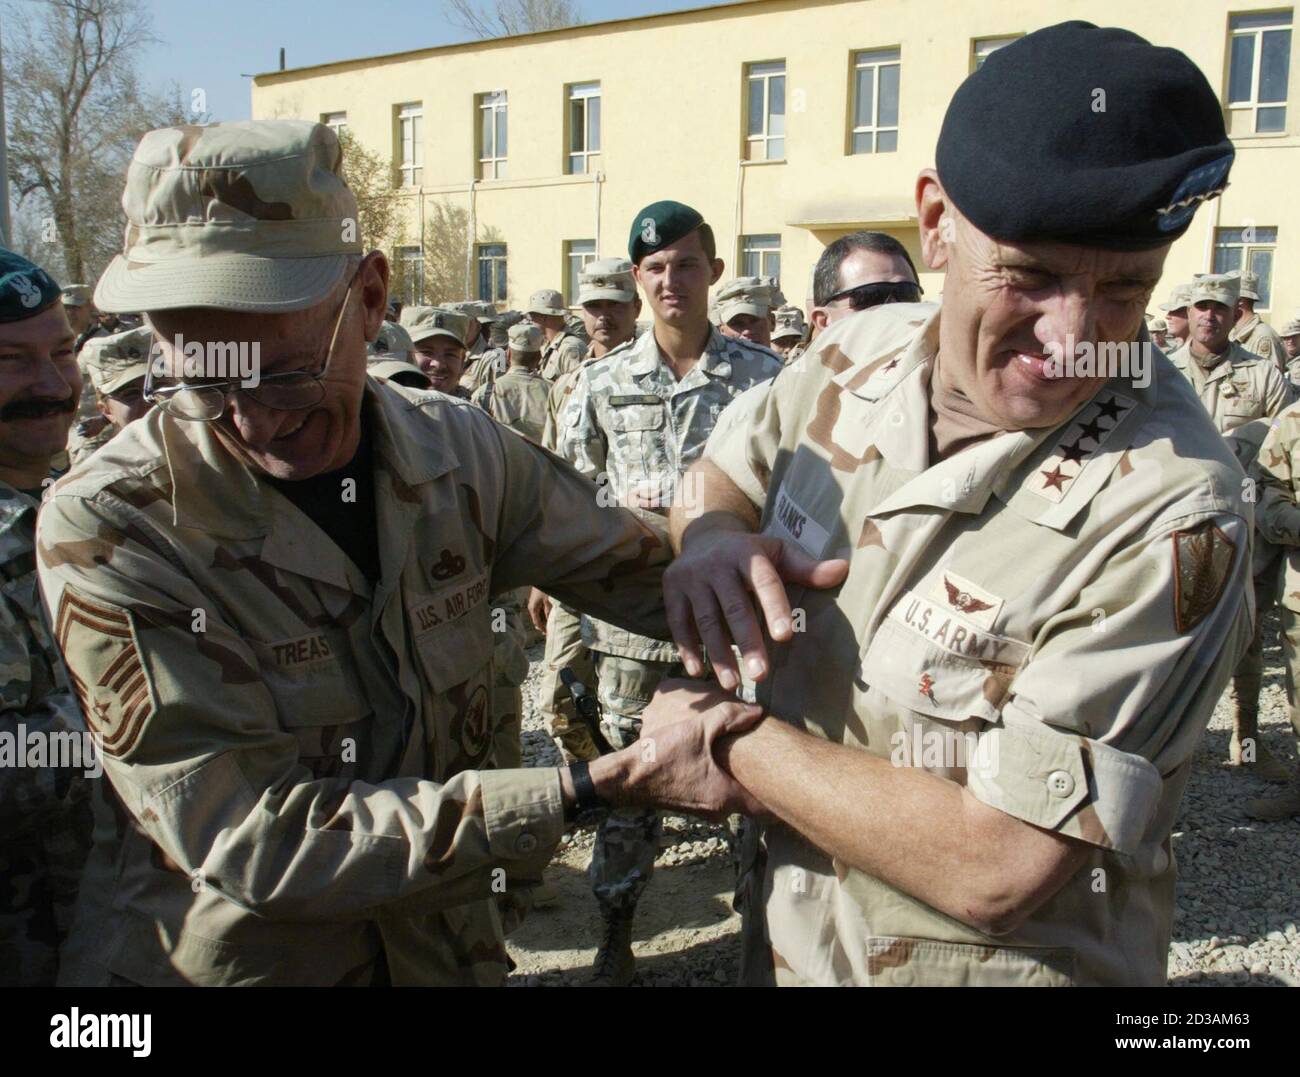 U.S. Army General Tommy Franks (R), chief of the U.S. and coalition forces, jokes with a peacekeeper from Coalition Joint Task Force 180 at Bagram air base November 29, 2002. Around 12,000 U.S. troops are participating at the operation 'Enduring Freedom' in Afghanistan. REUTERS/Radu Sigheti  RS/CP Stock Photo